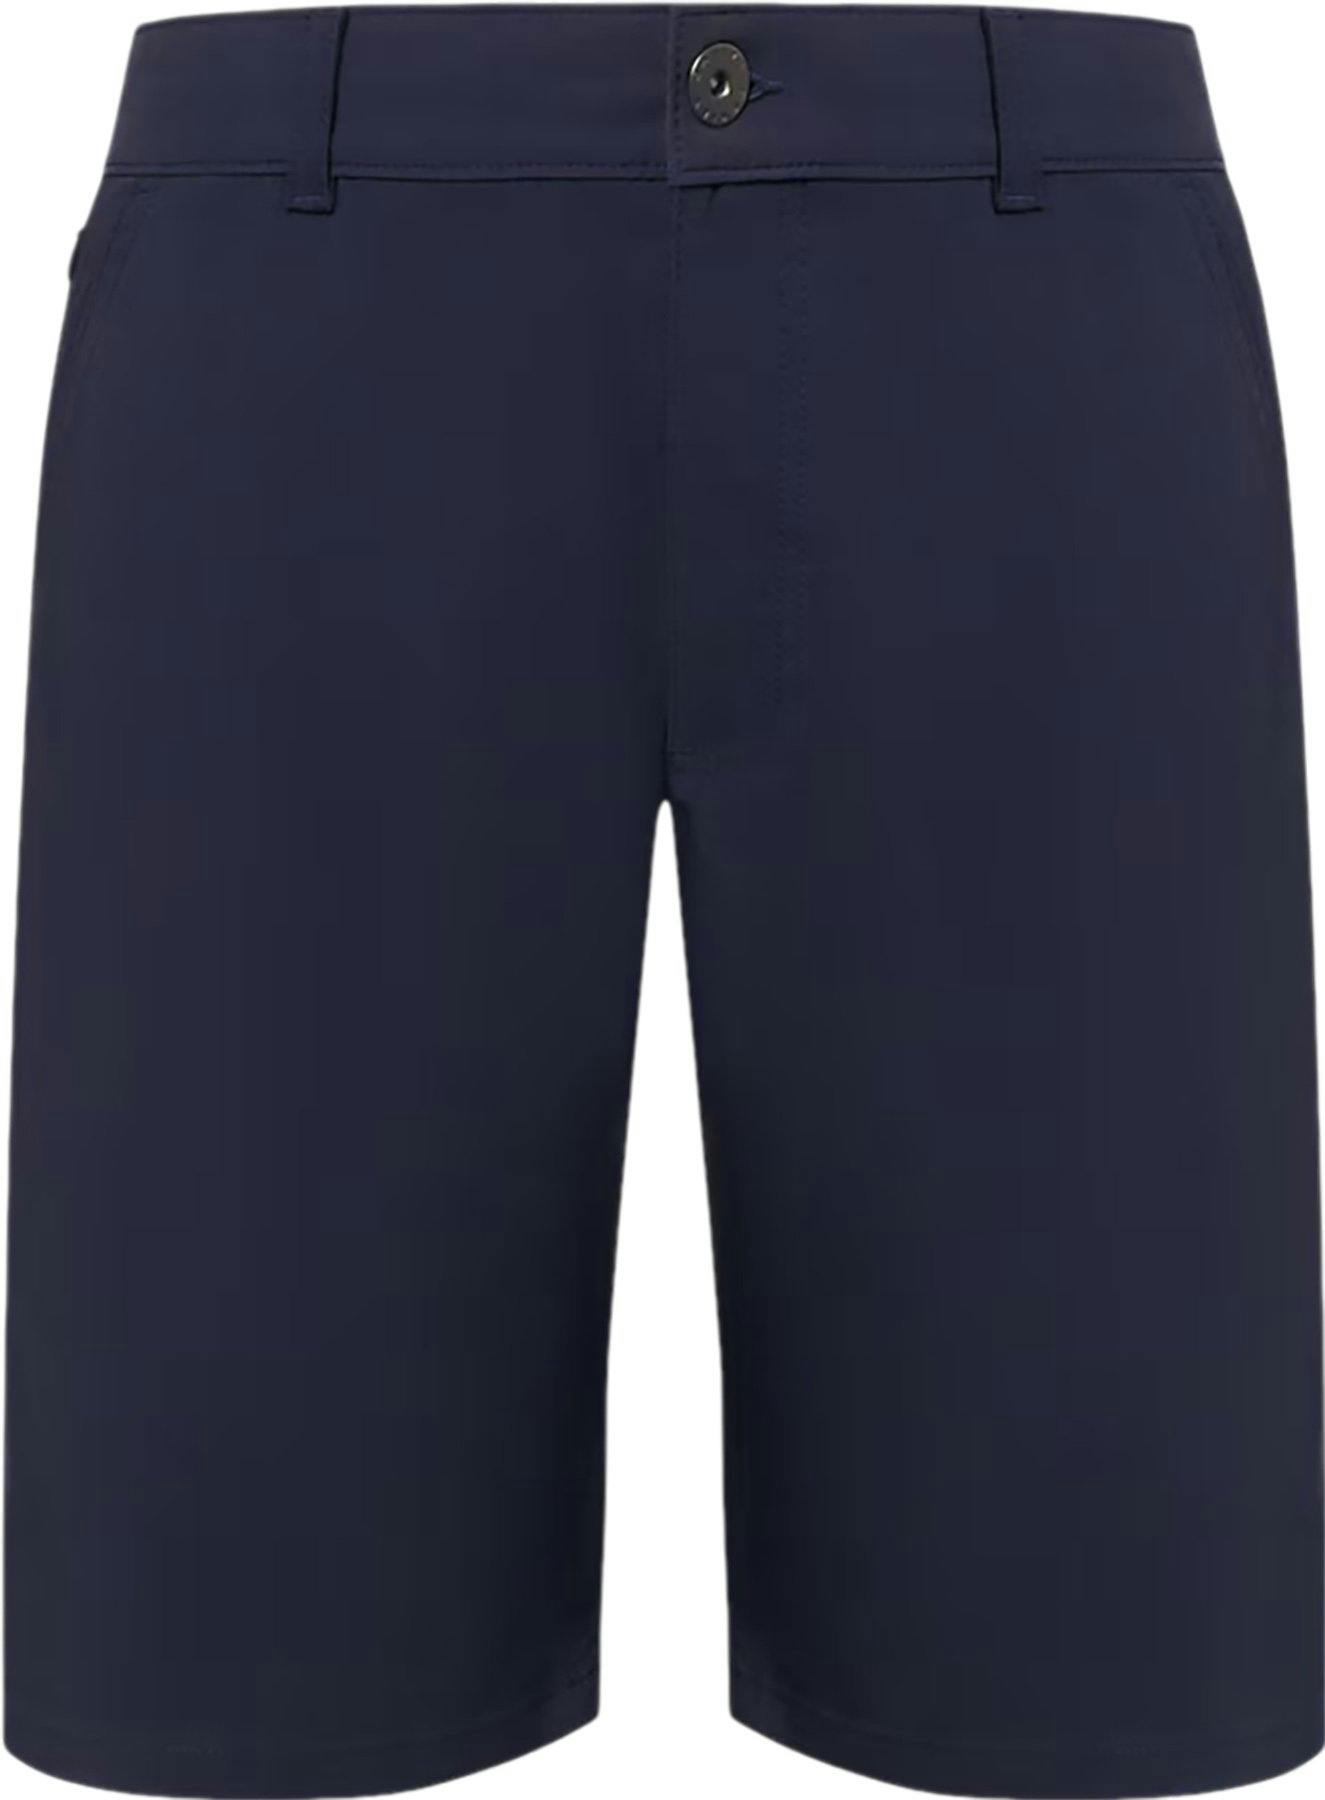 Product image for Perf 5 2.0 Utility Shorts - Men's